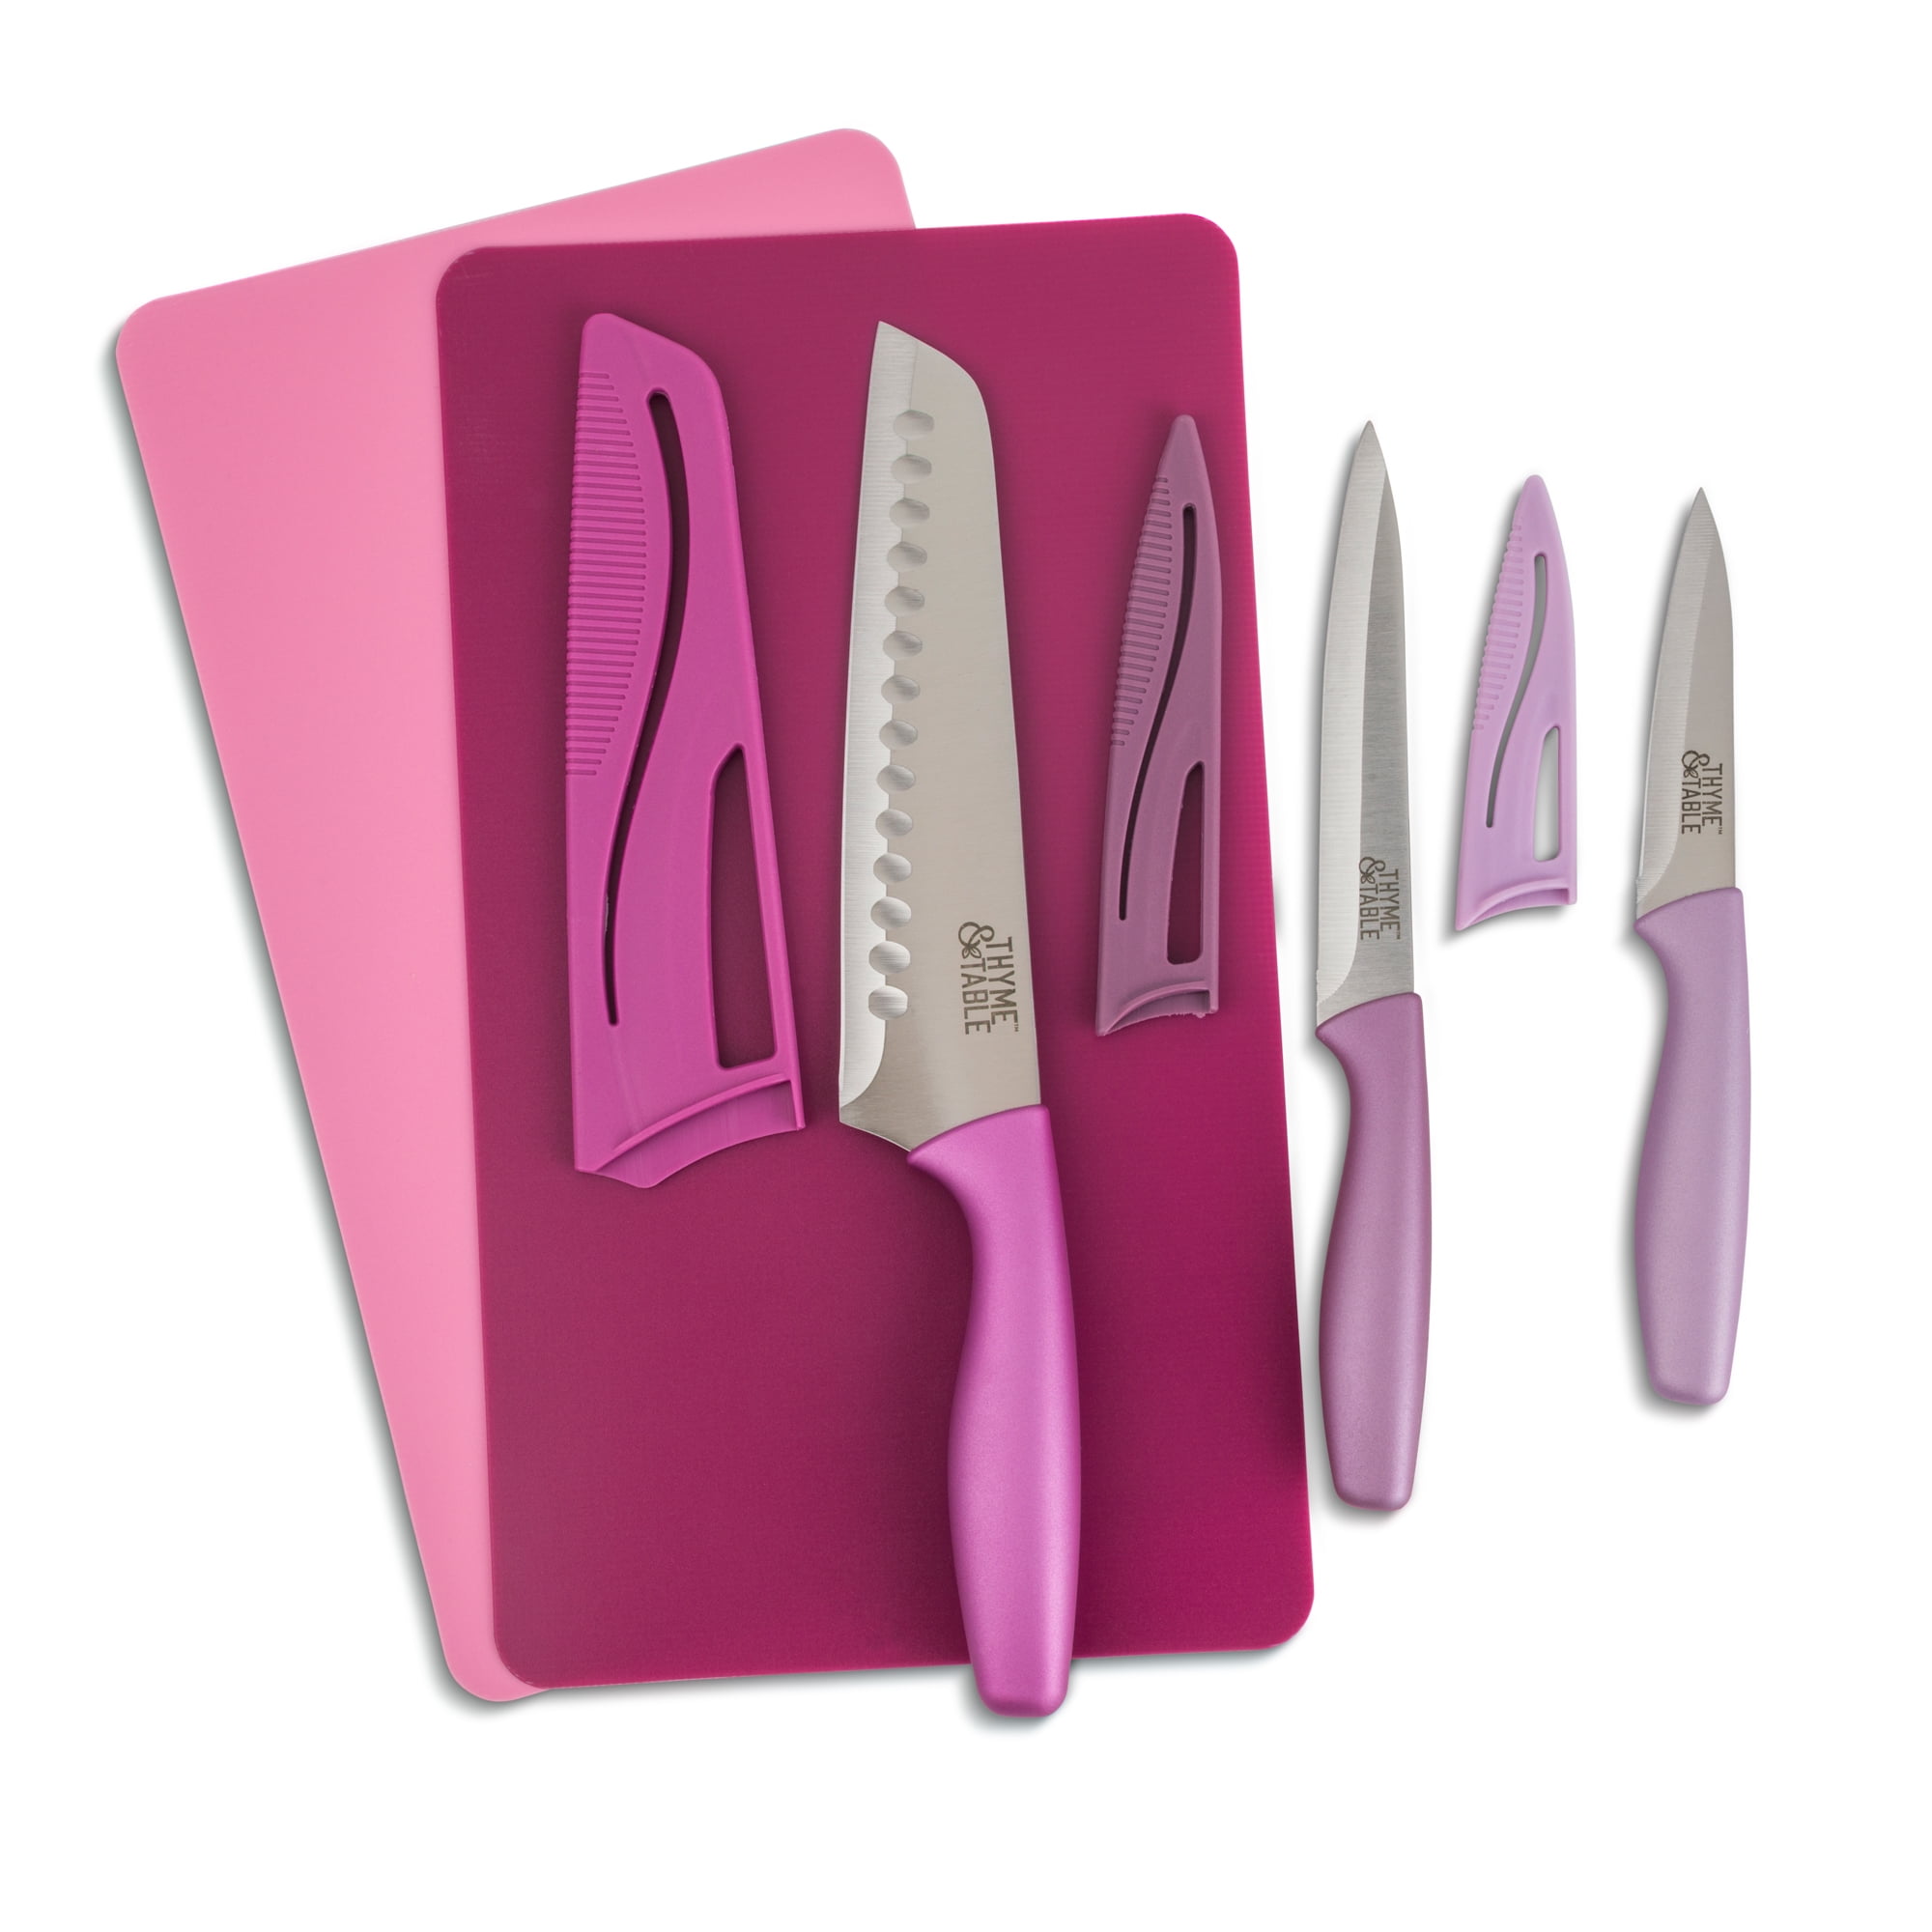 Thyme & Table 5 Piece Knife & Cutting Mat Set Festive Collection